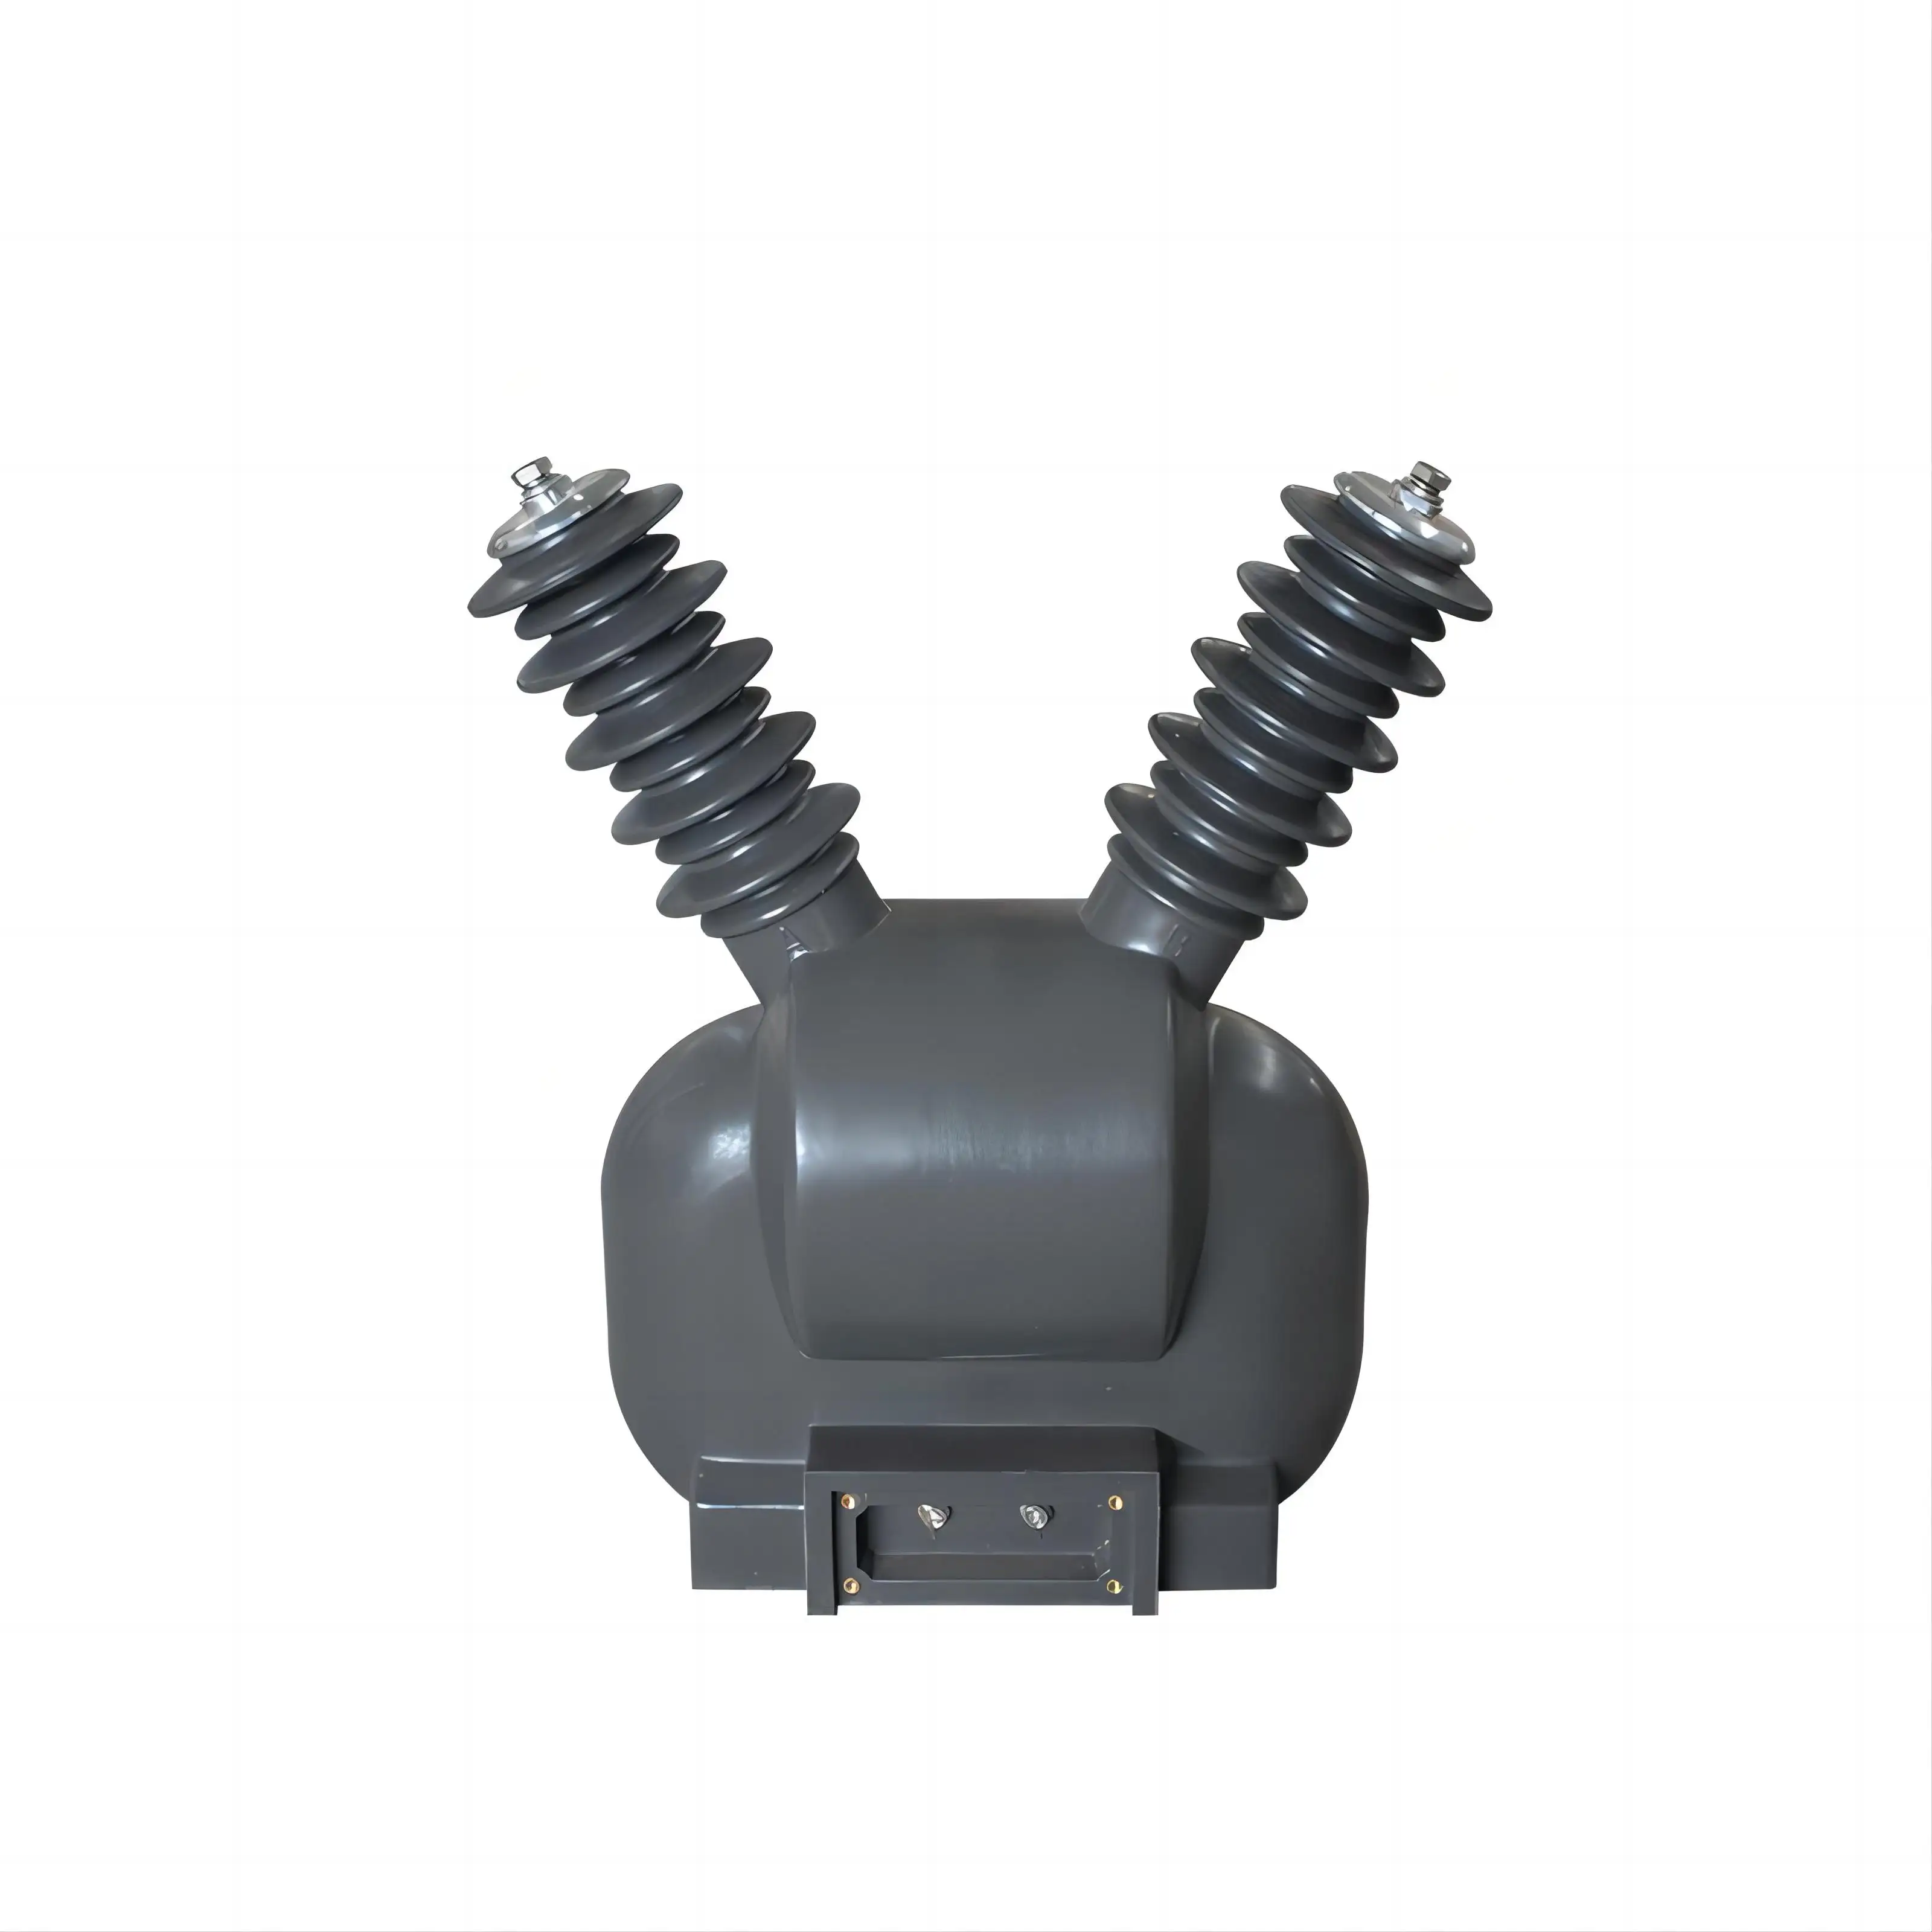 JDZW-35W2 Single-Phase Horizontal Autotransformer Sheep Horn Type Voltage Transformer with Toroidal Coil Power Instrument Use